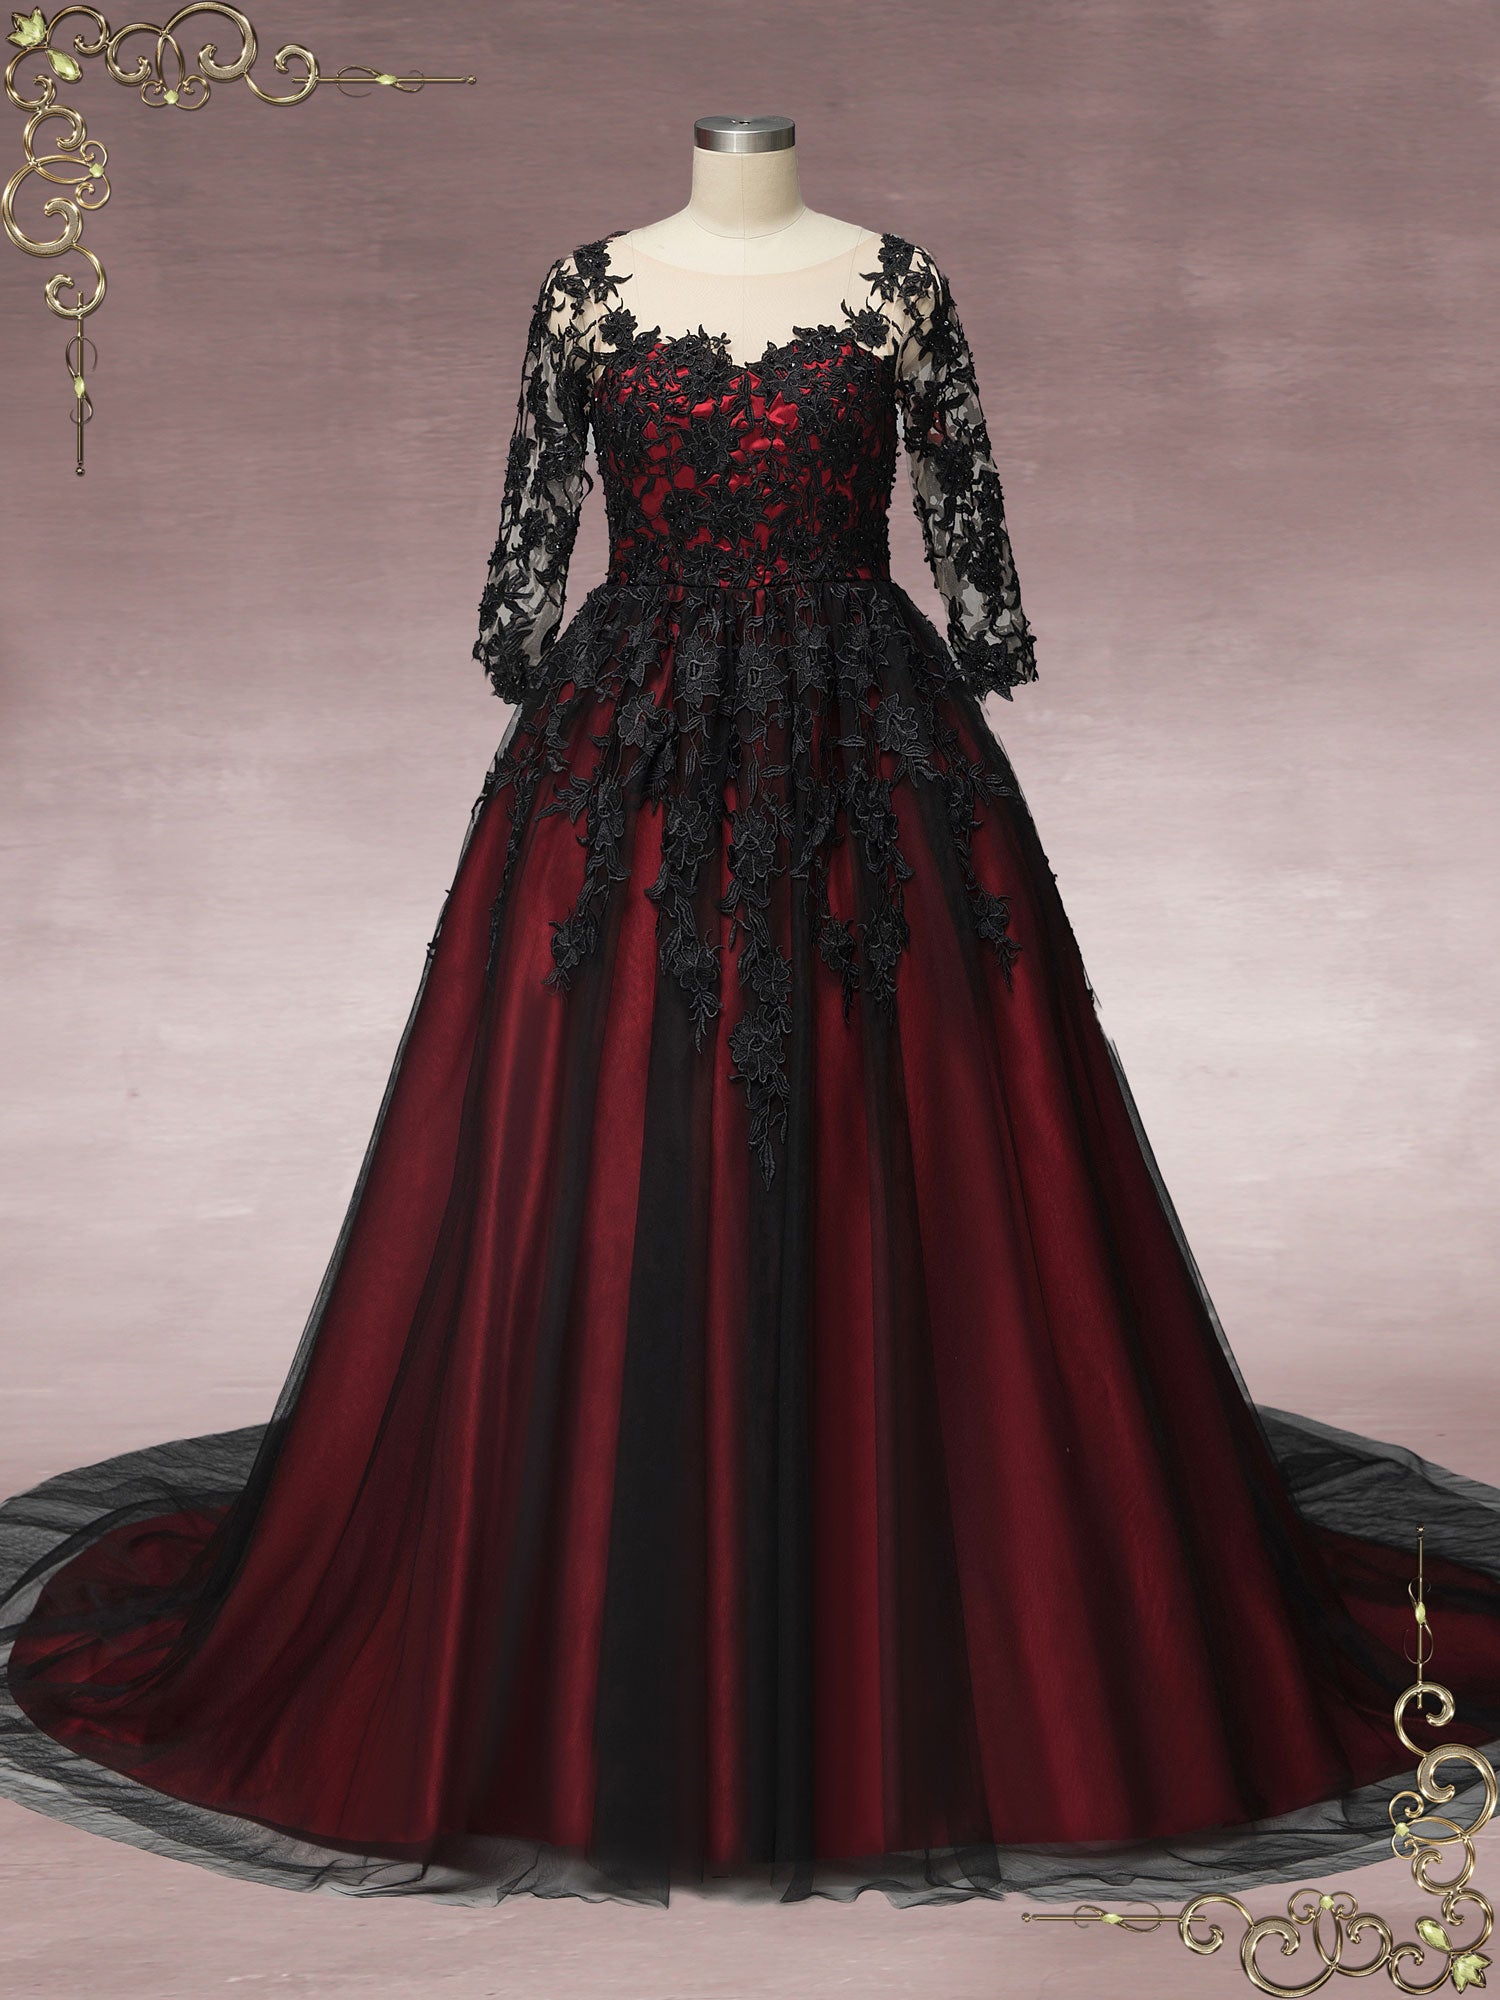 Black Lace Wedding Dress with Red ...